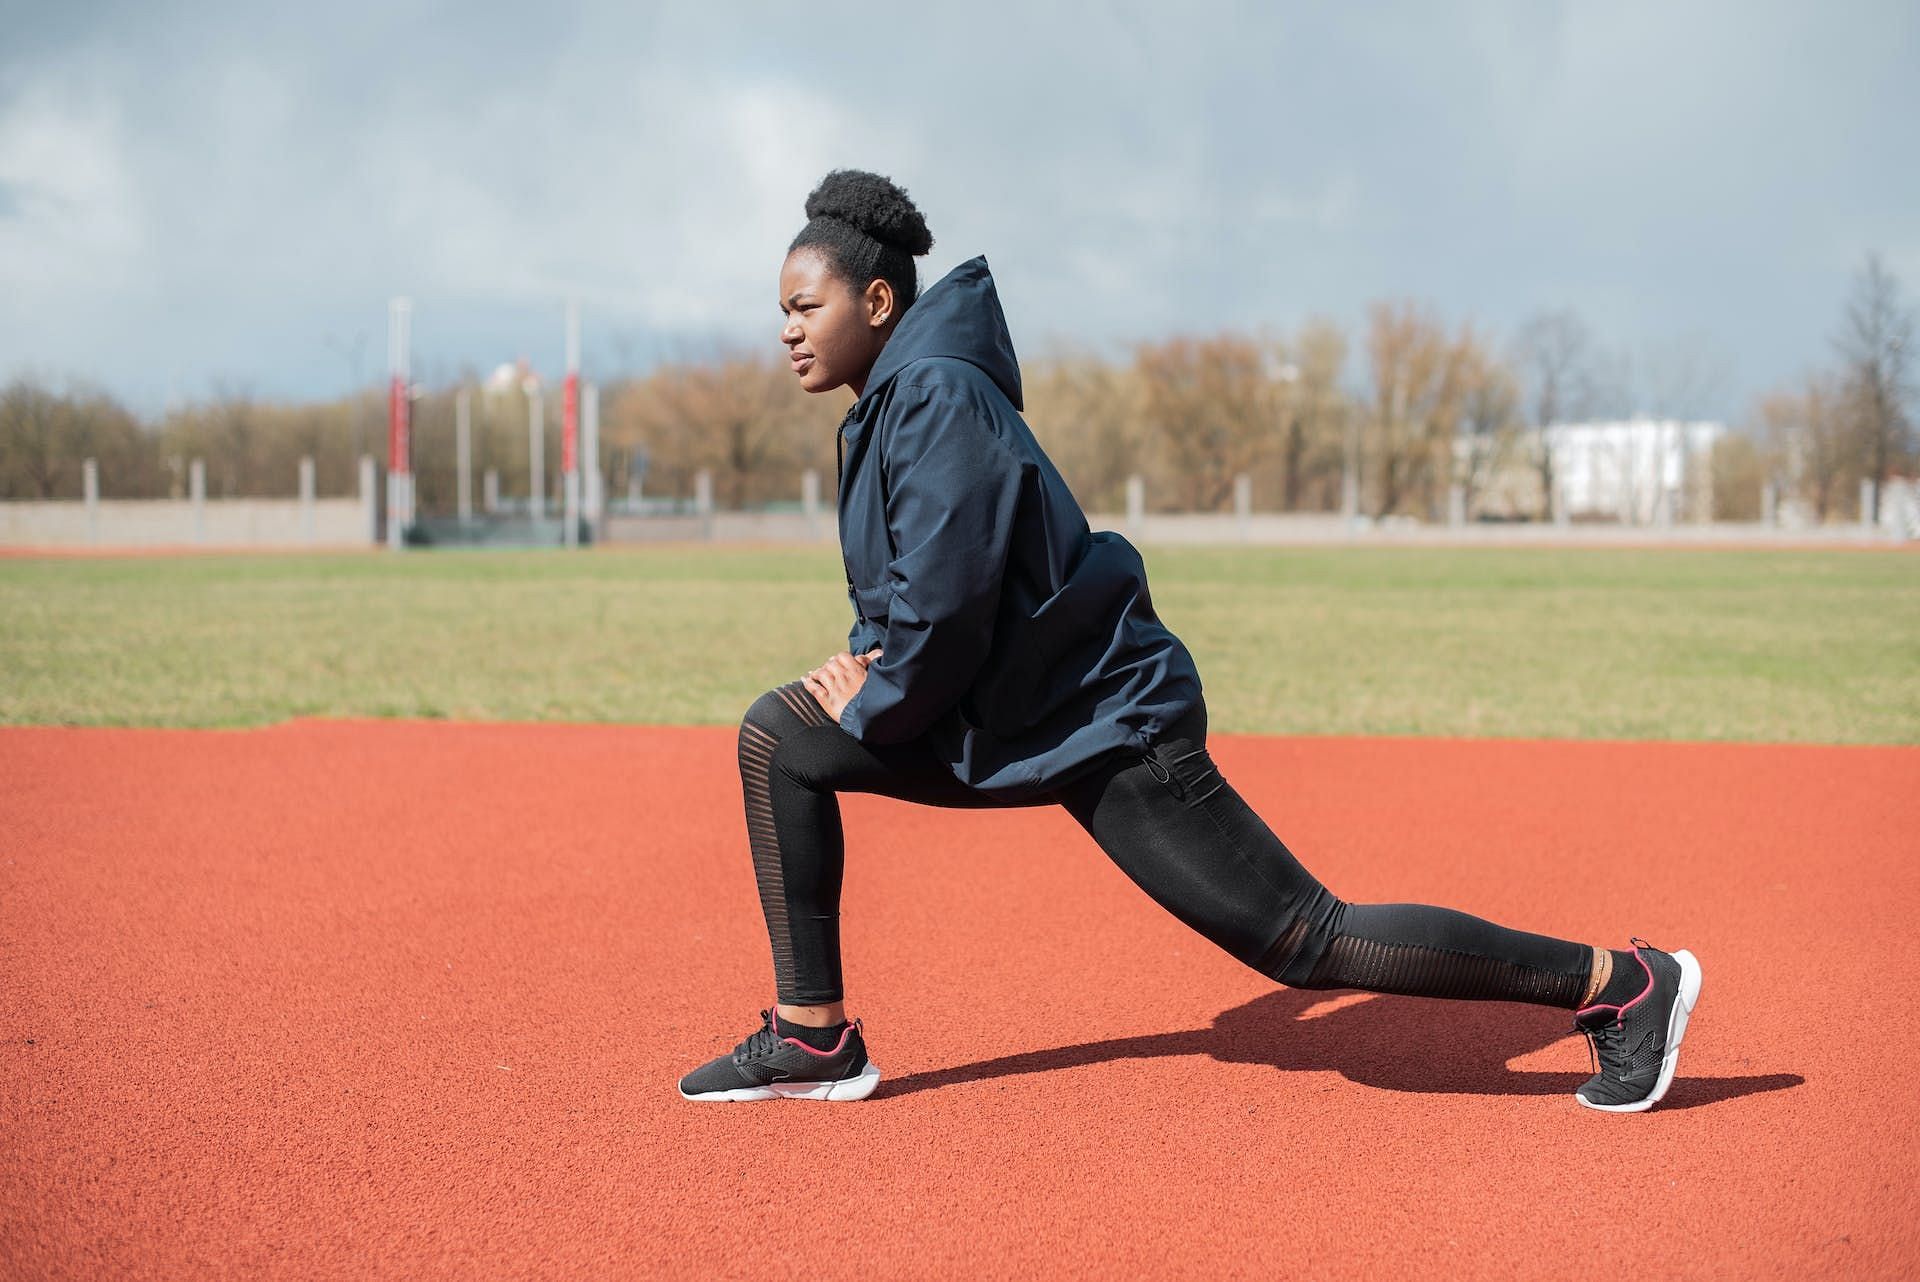 Runner&#039;s lunge is one of the best leg stretches before workout. (Image via Pexels/Mikhail Nilov)